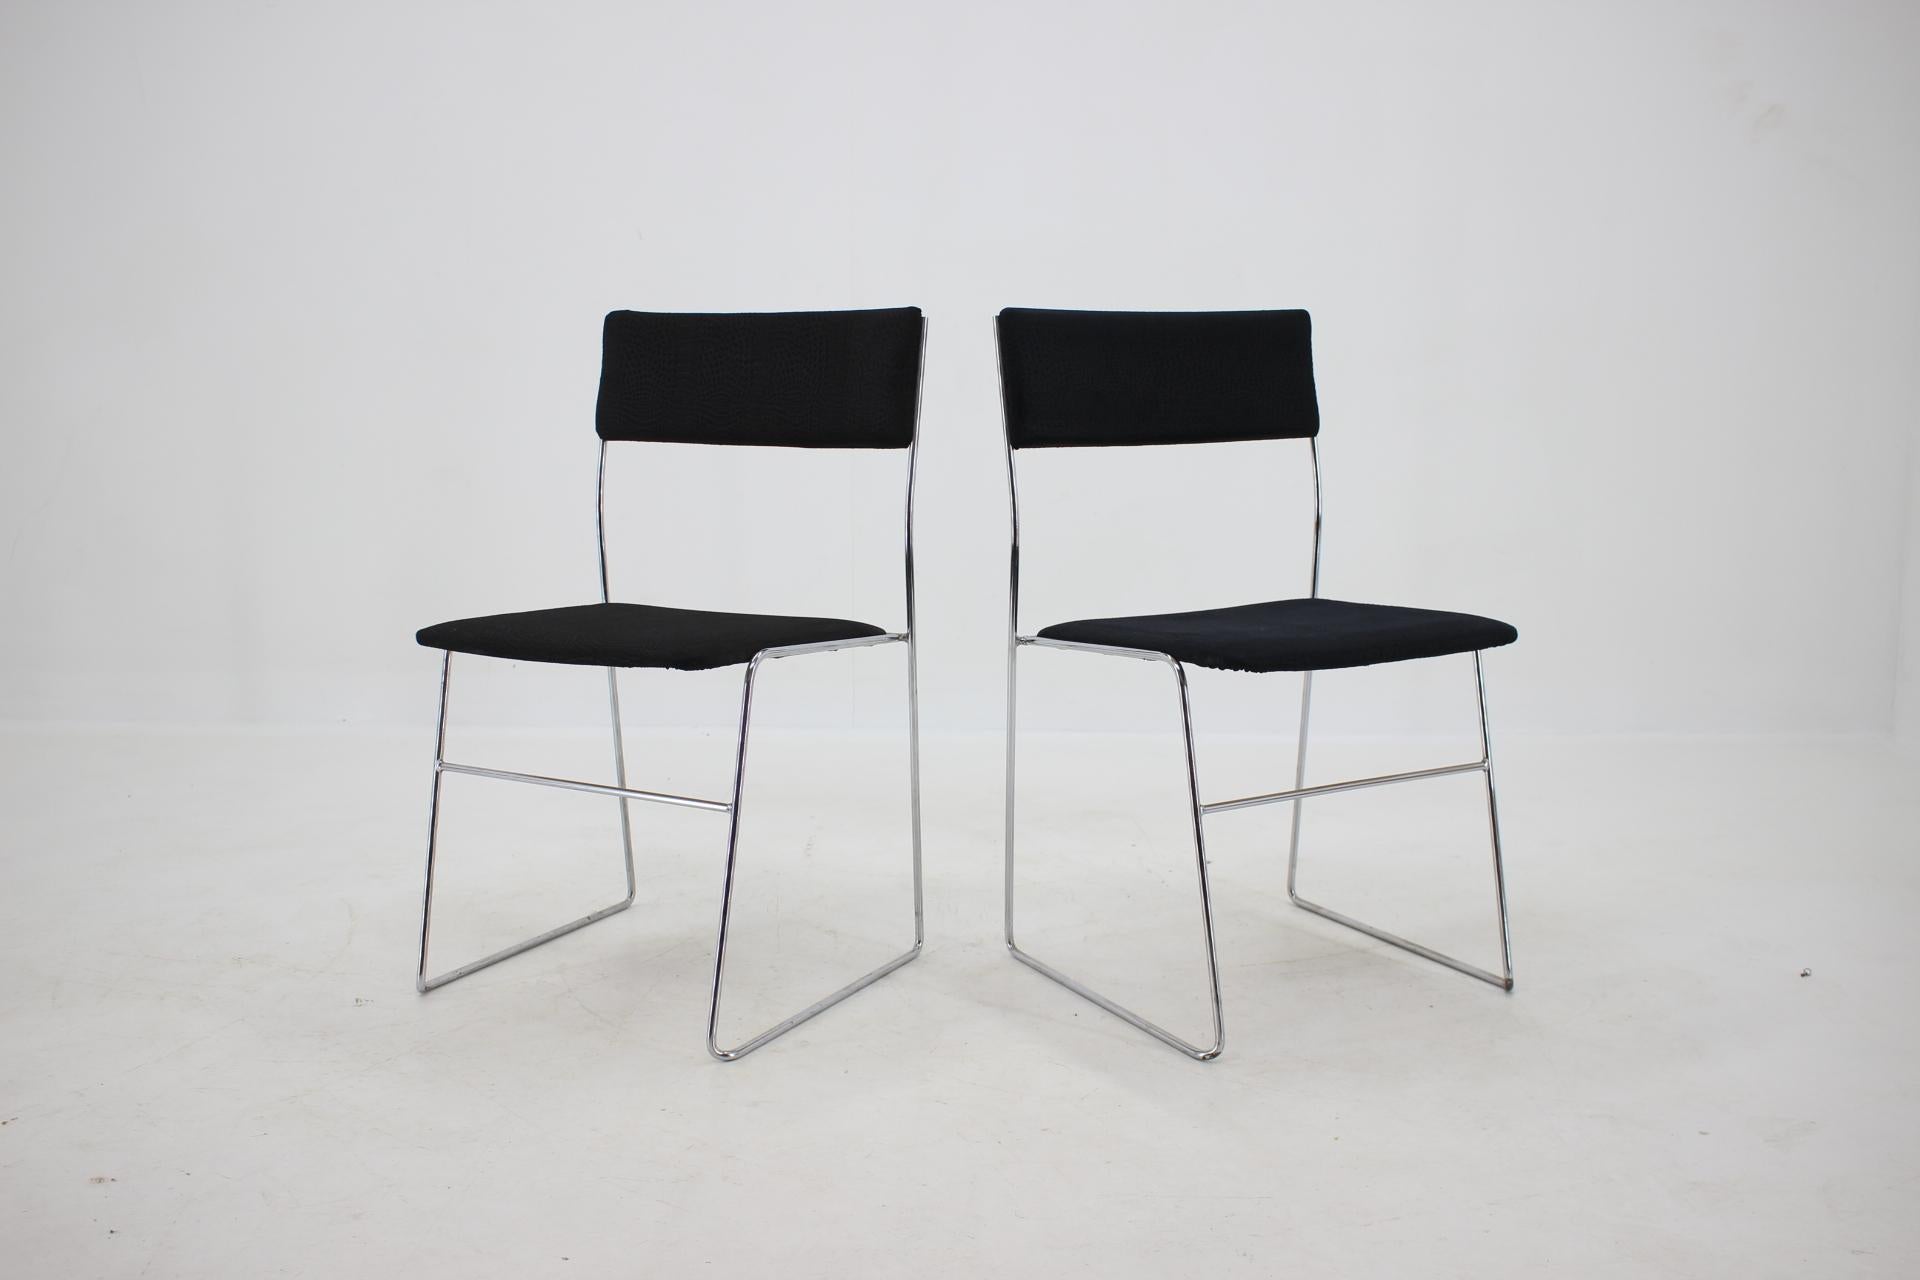 Polychromed 1970s Set of Four Minimalist Chrome Plated Dining Chairs, Czechoslovakia For Sale